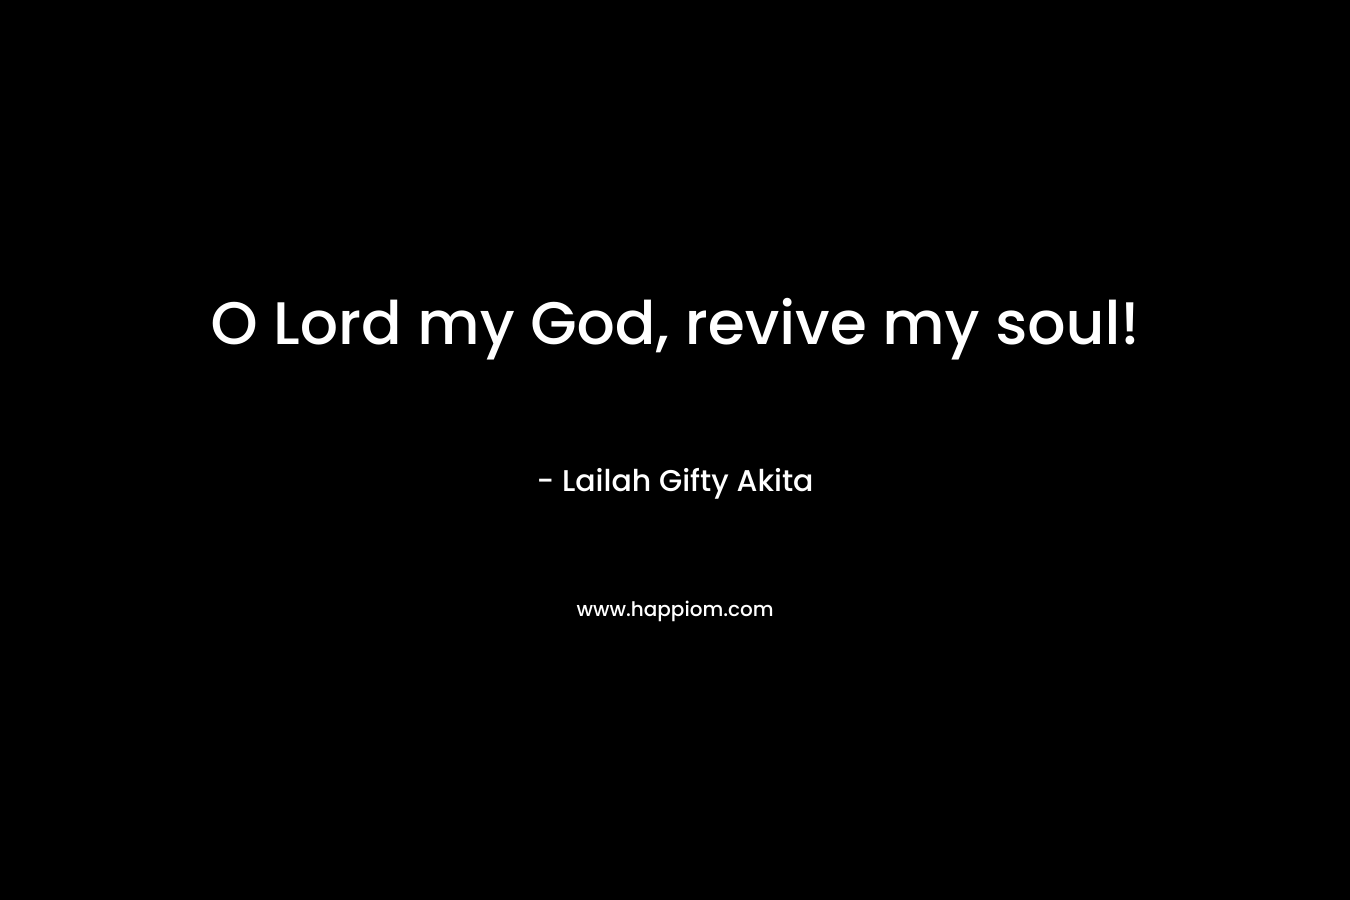 O Lord my God, revive my soul!